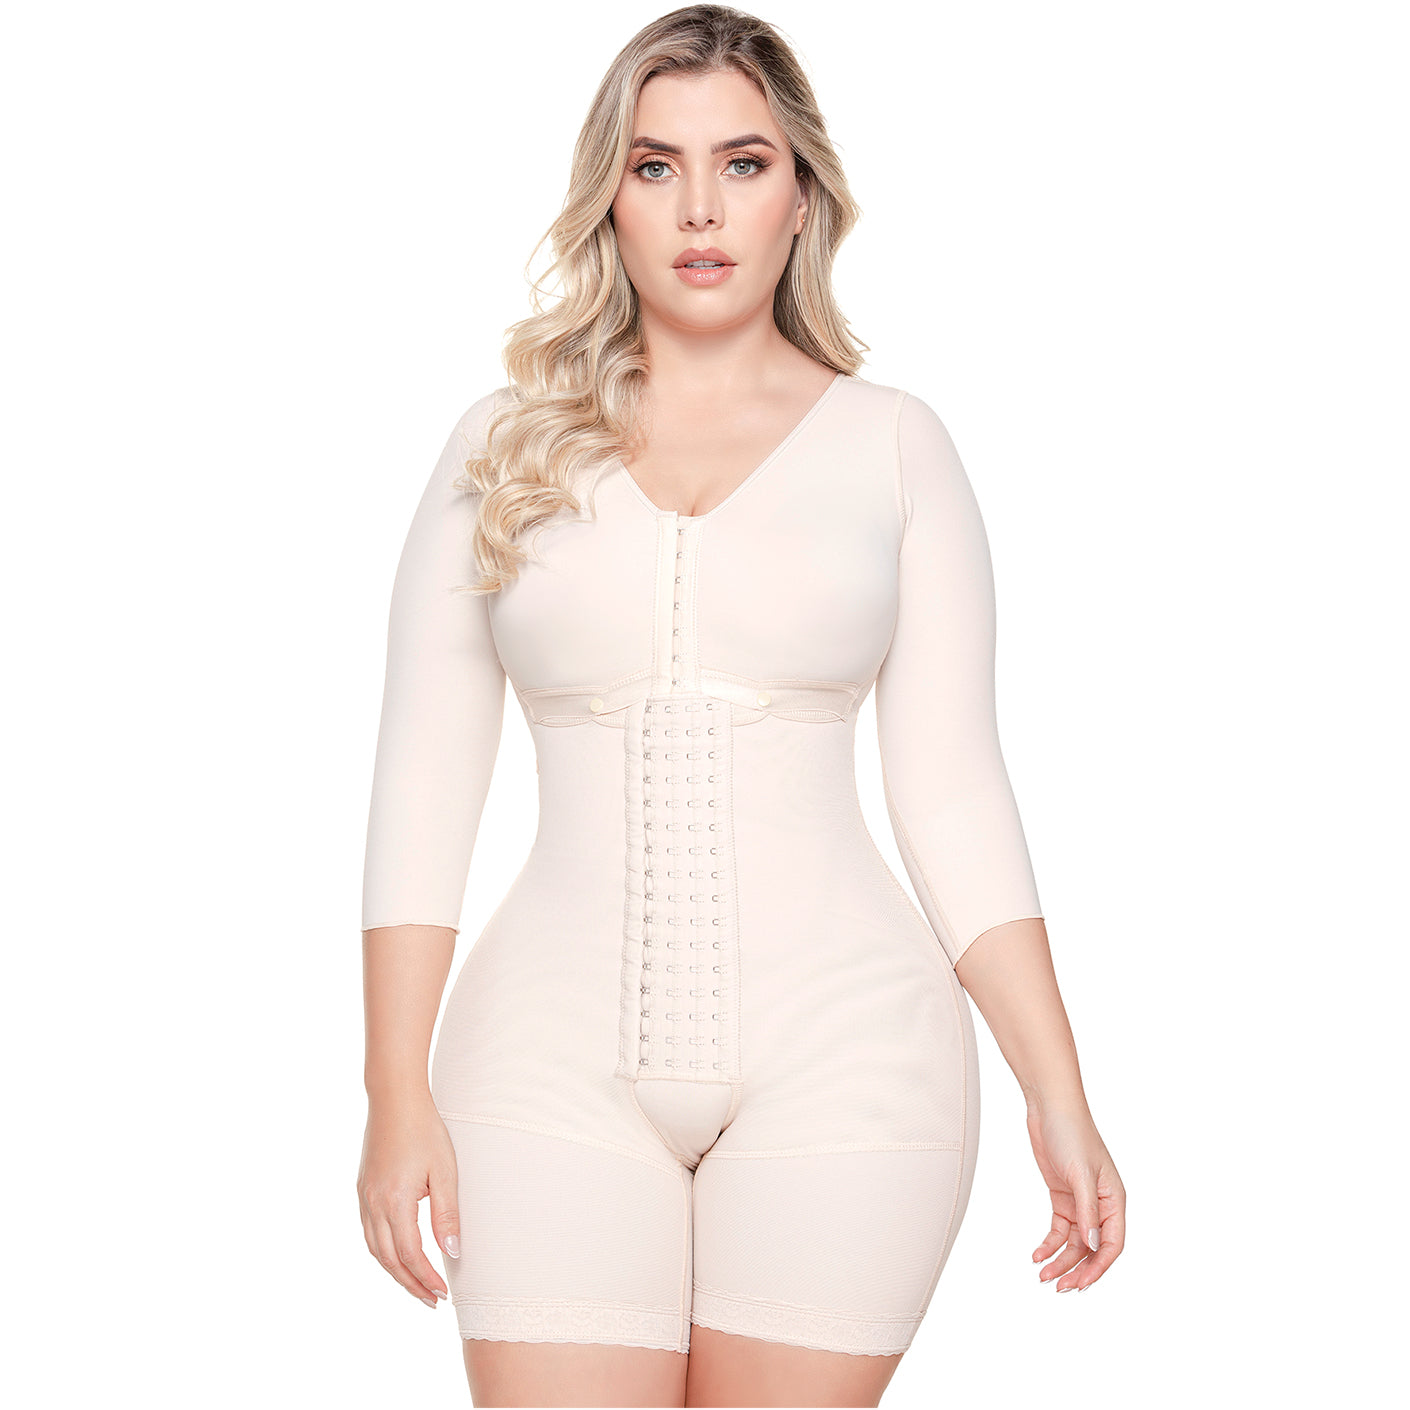 SONRYSE 103BF After Surgery for Women with Built-In Bra – Curved